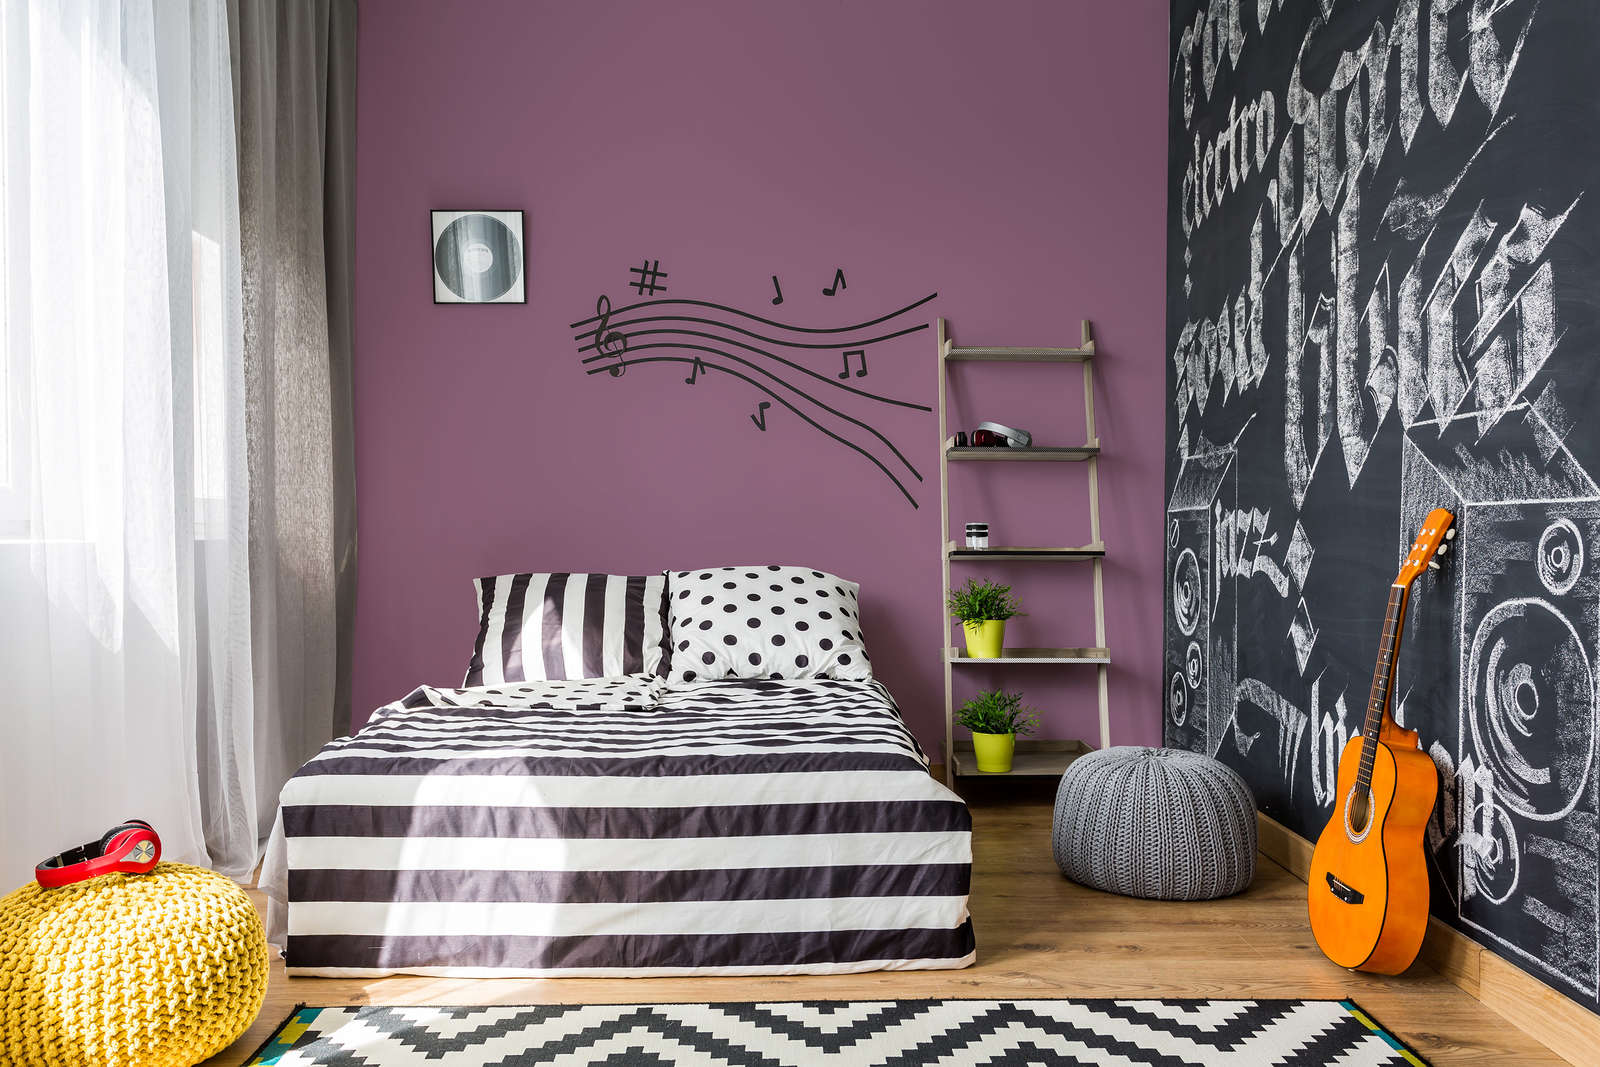             Premium Wall Paint cheerful berry »Beautiful Berry« NW211 – 1 litre
        